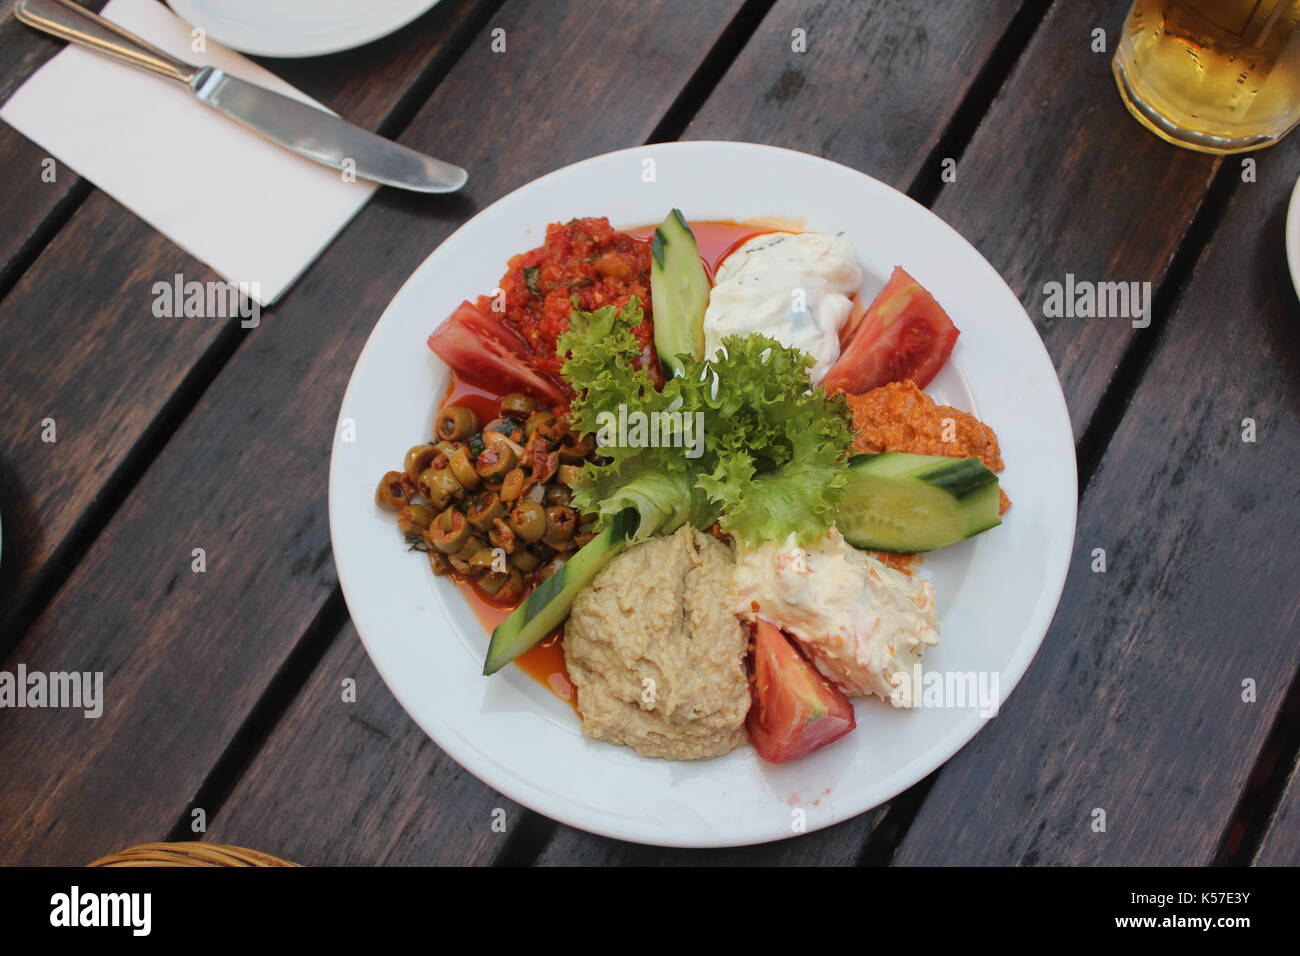 Turkish Sharing Platter with Dips Including Hummus, Chilli, Carrot, Tomato and Tzatziki Served with Greens. Stock Photo